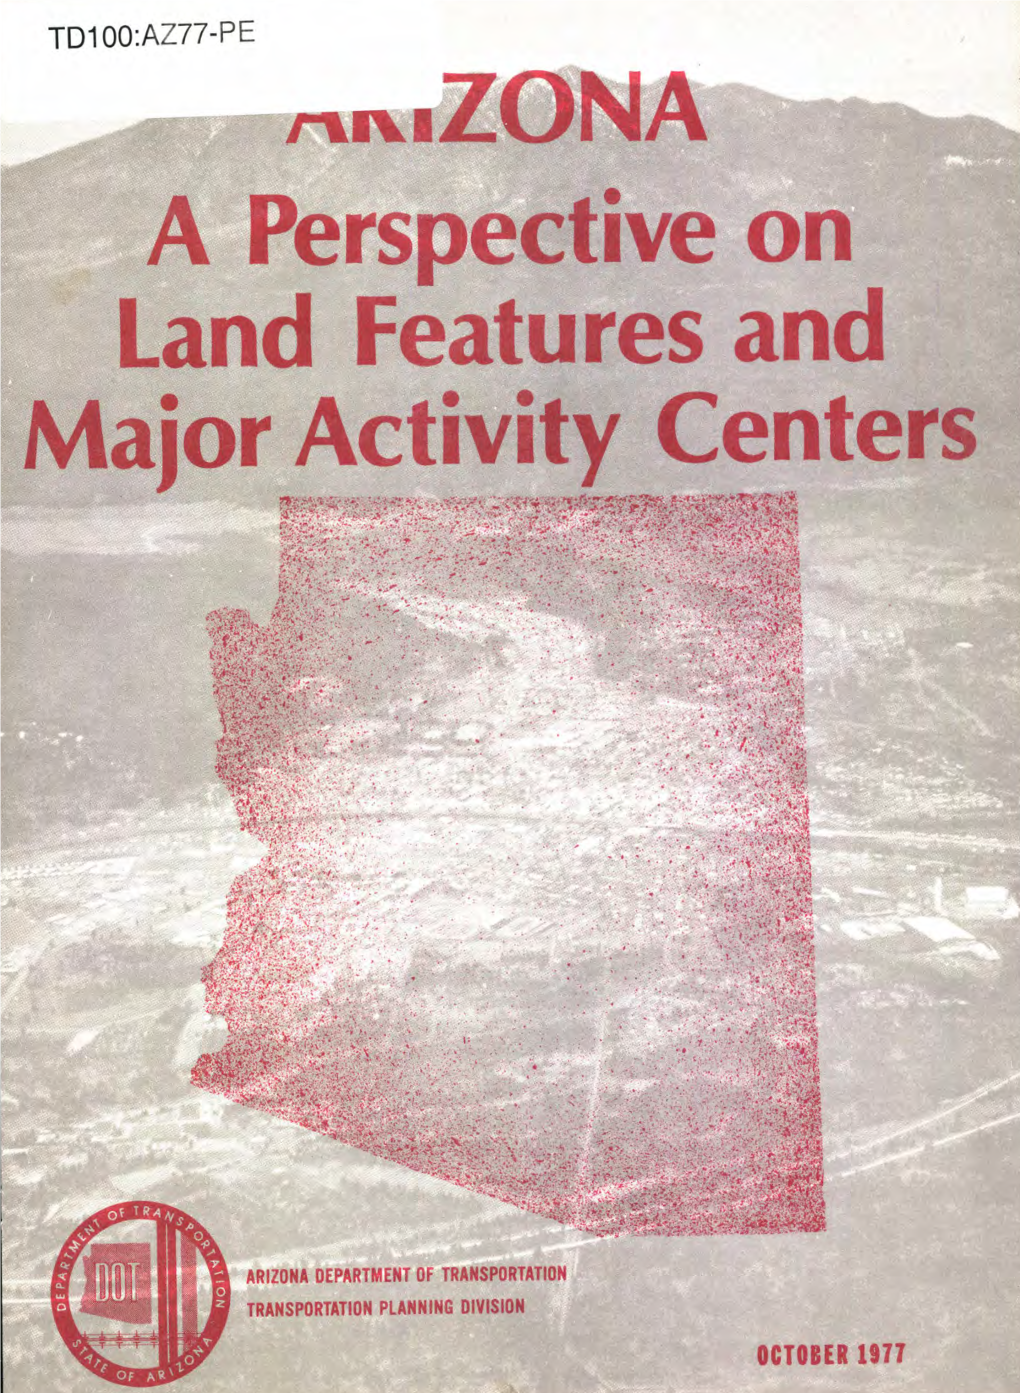 A Perspective on Land Features and Major Activity Centers